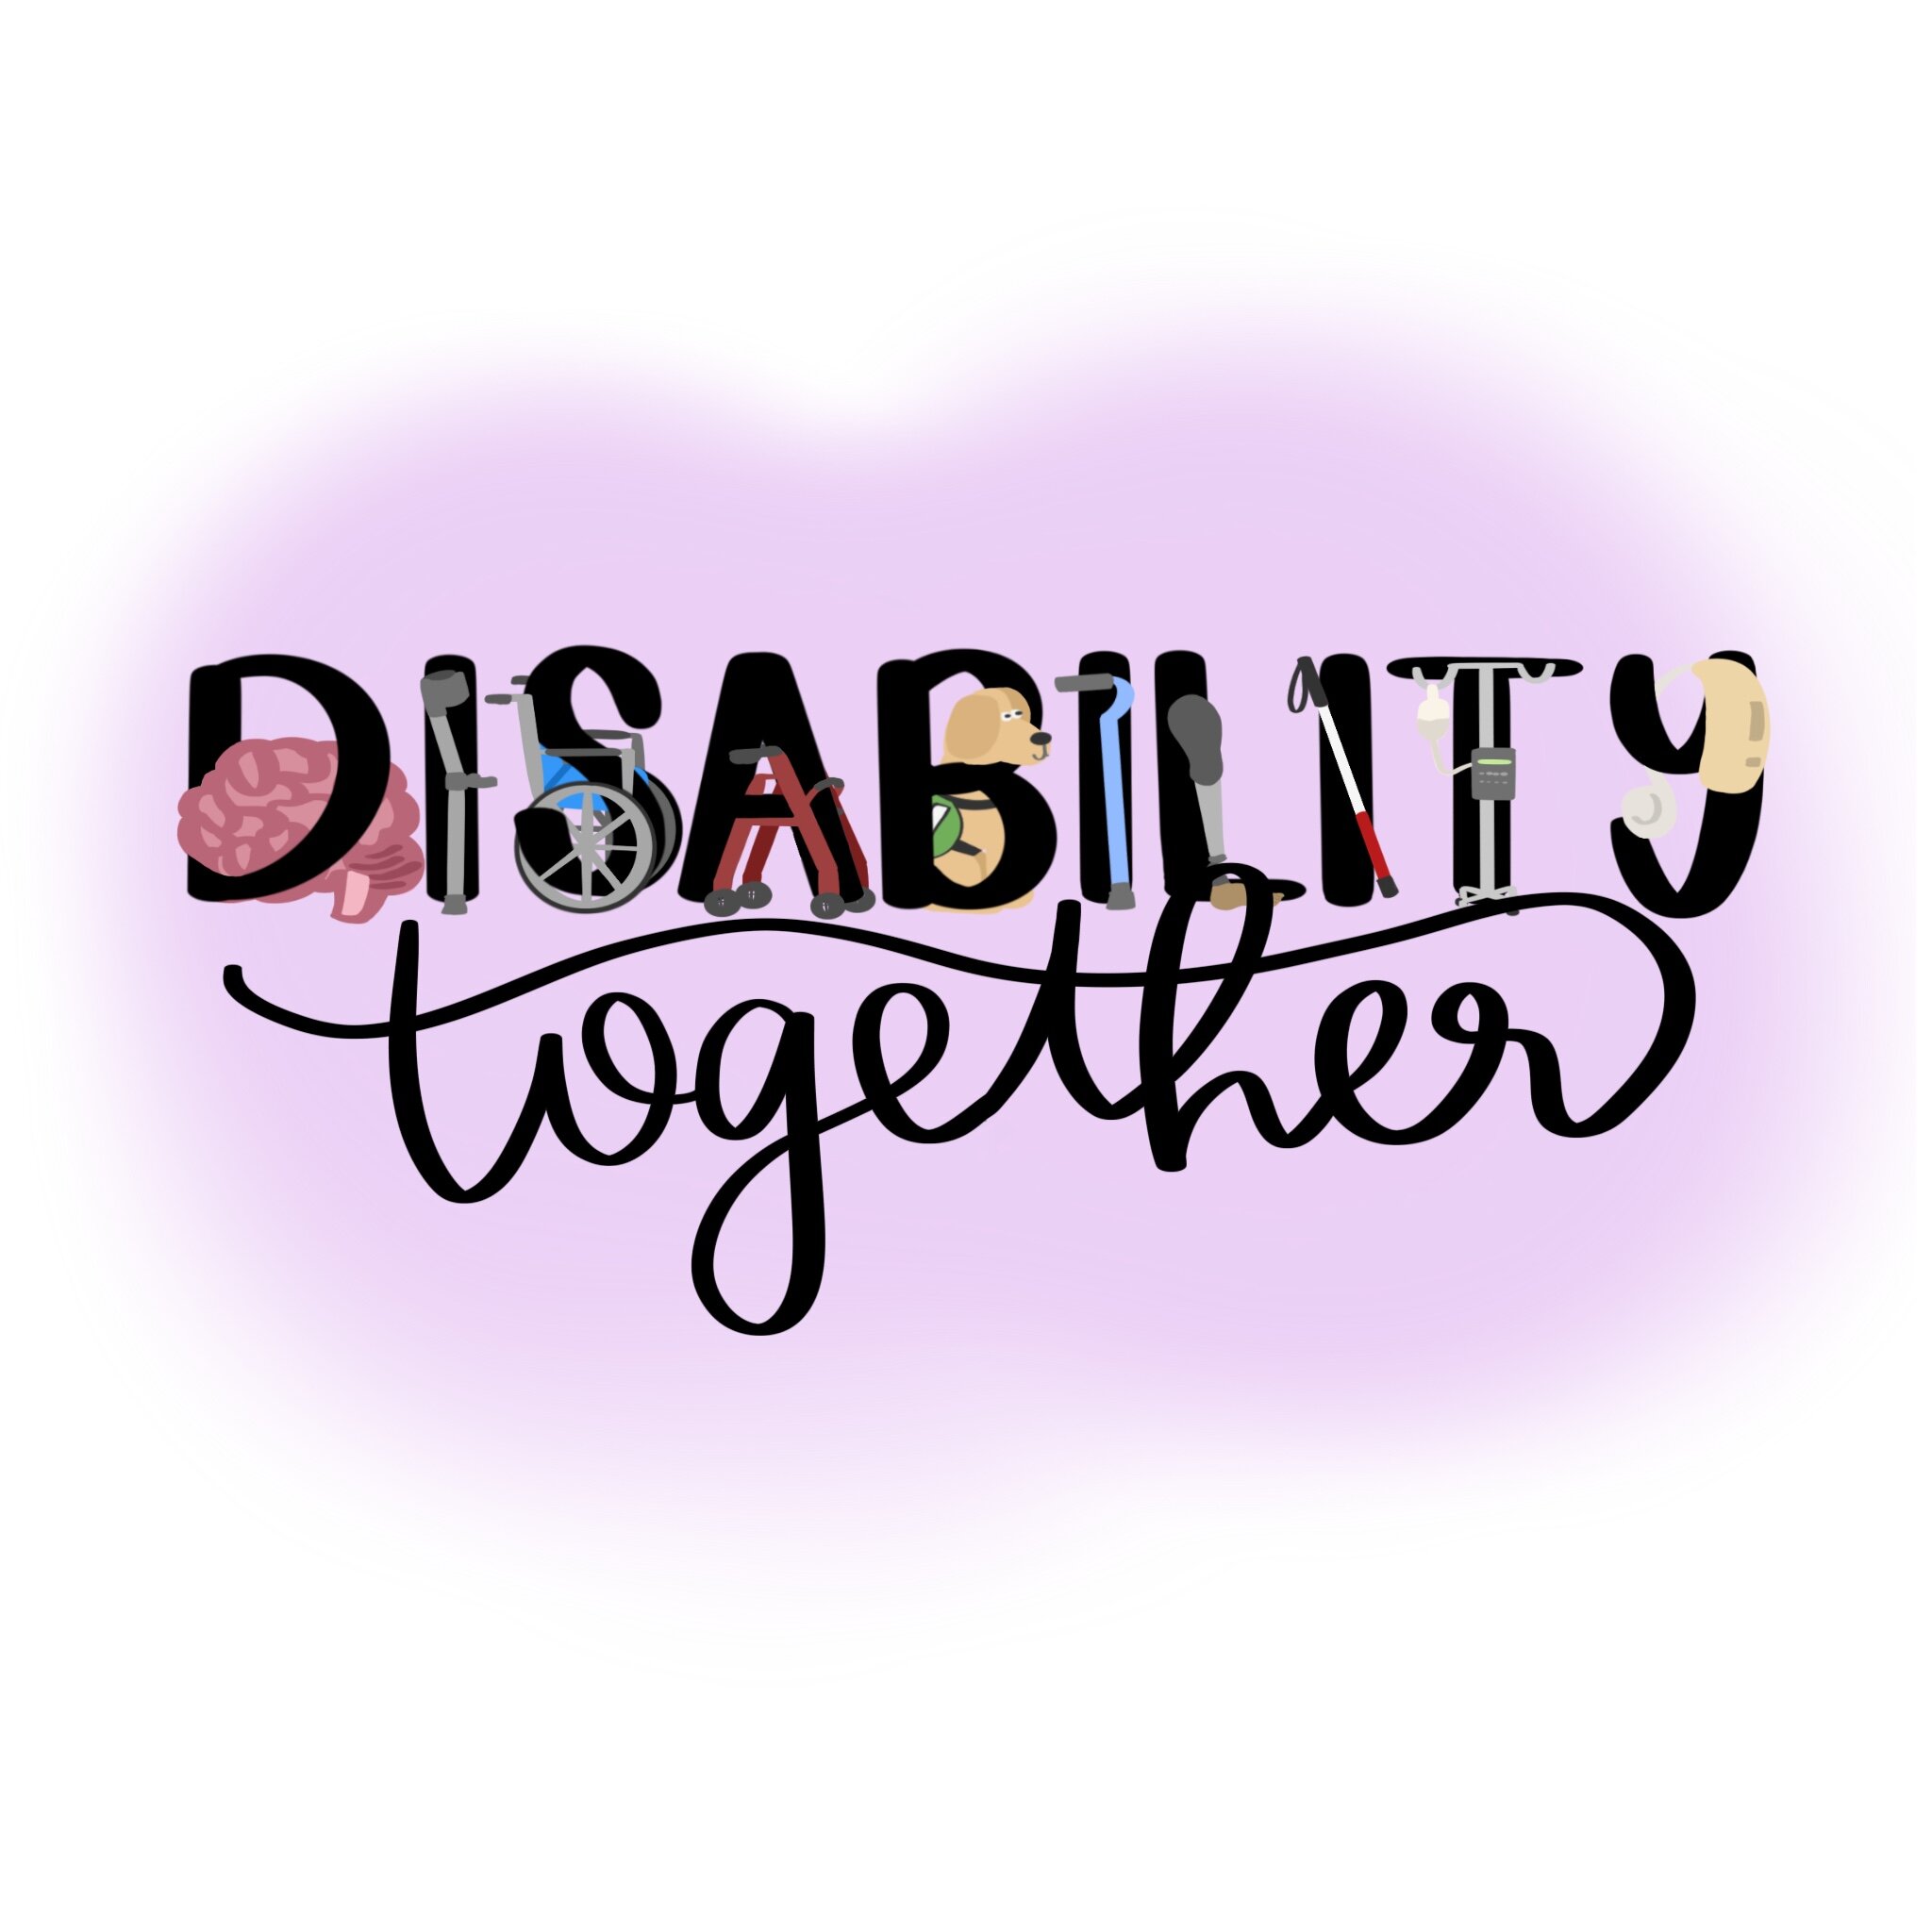 image for disability together instagram account